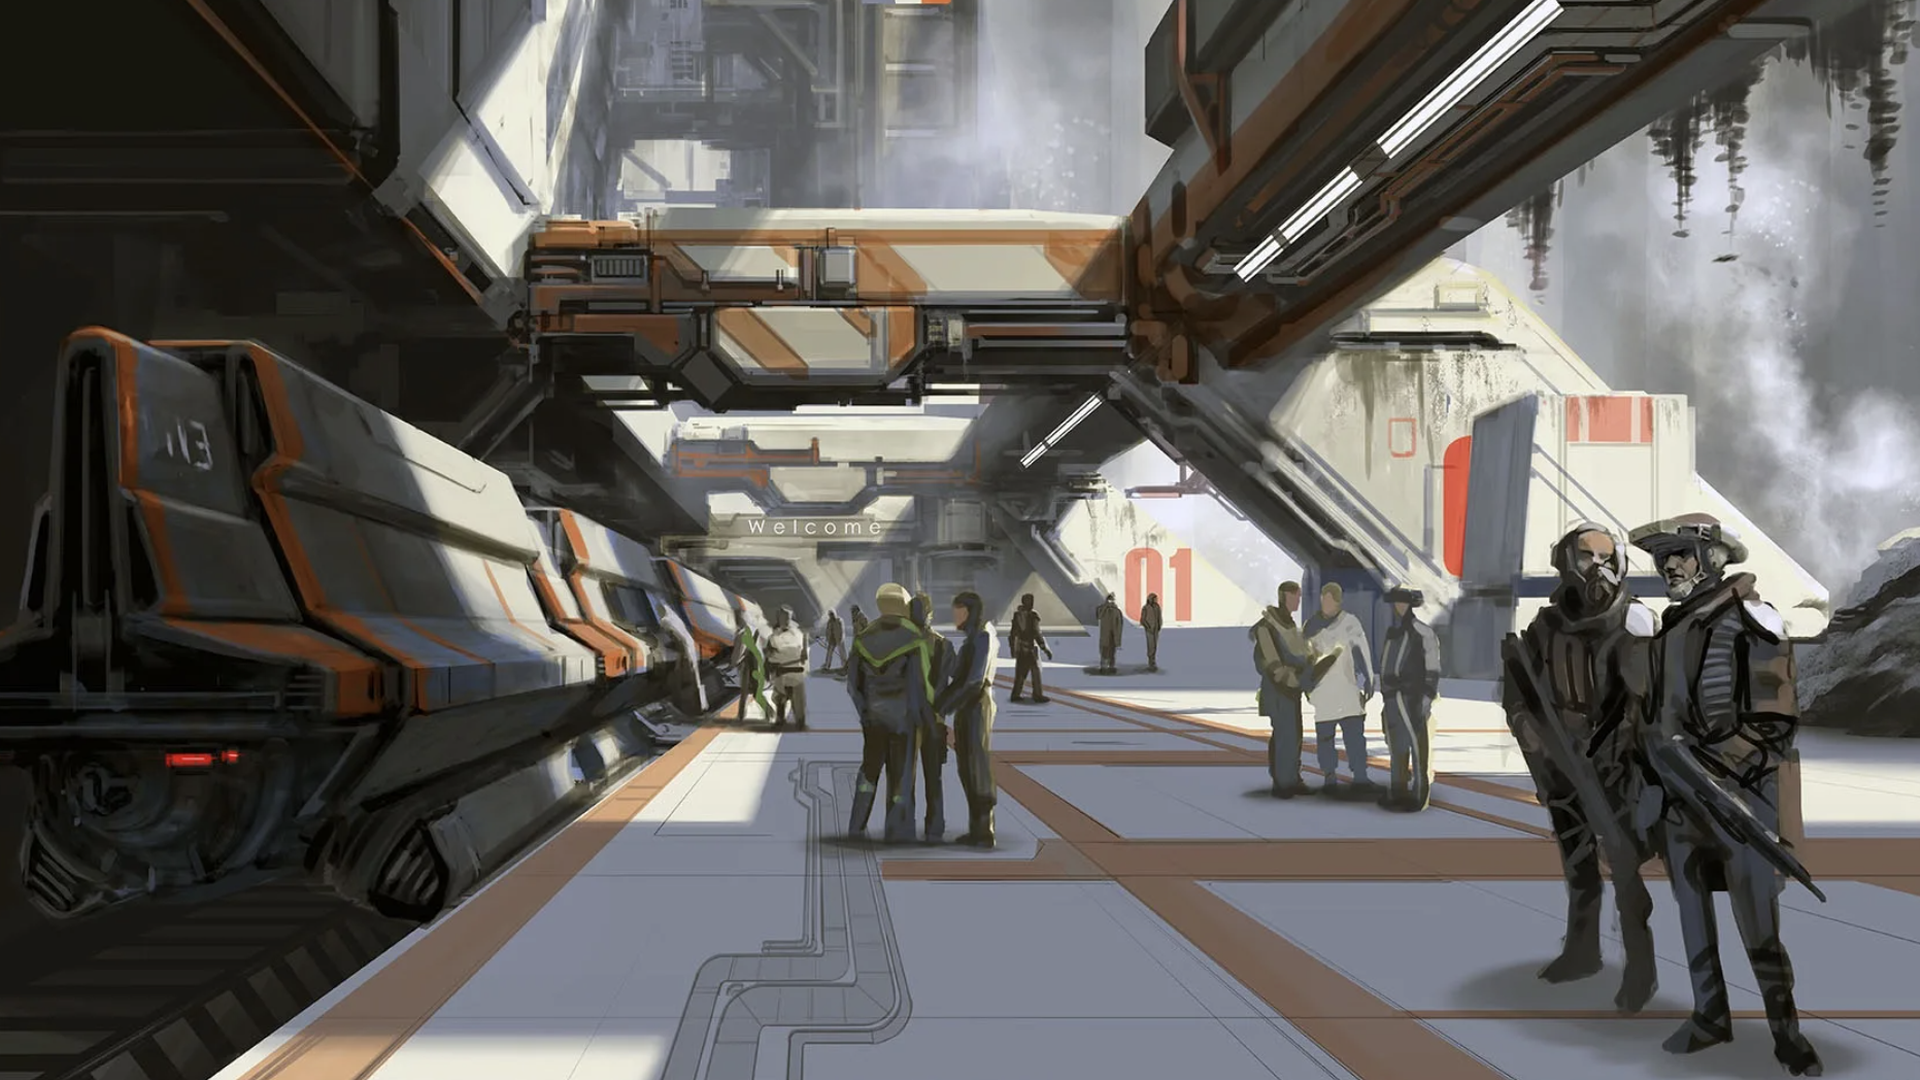 Concept art of a futuristic train station with passengers waiting on a platform